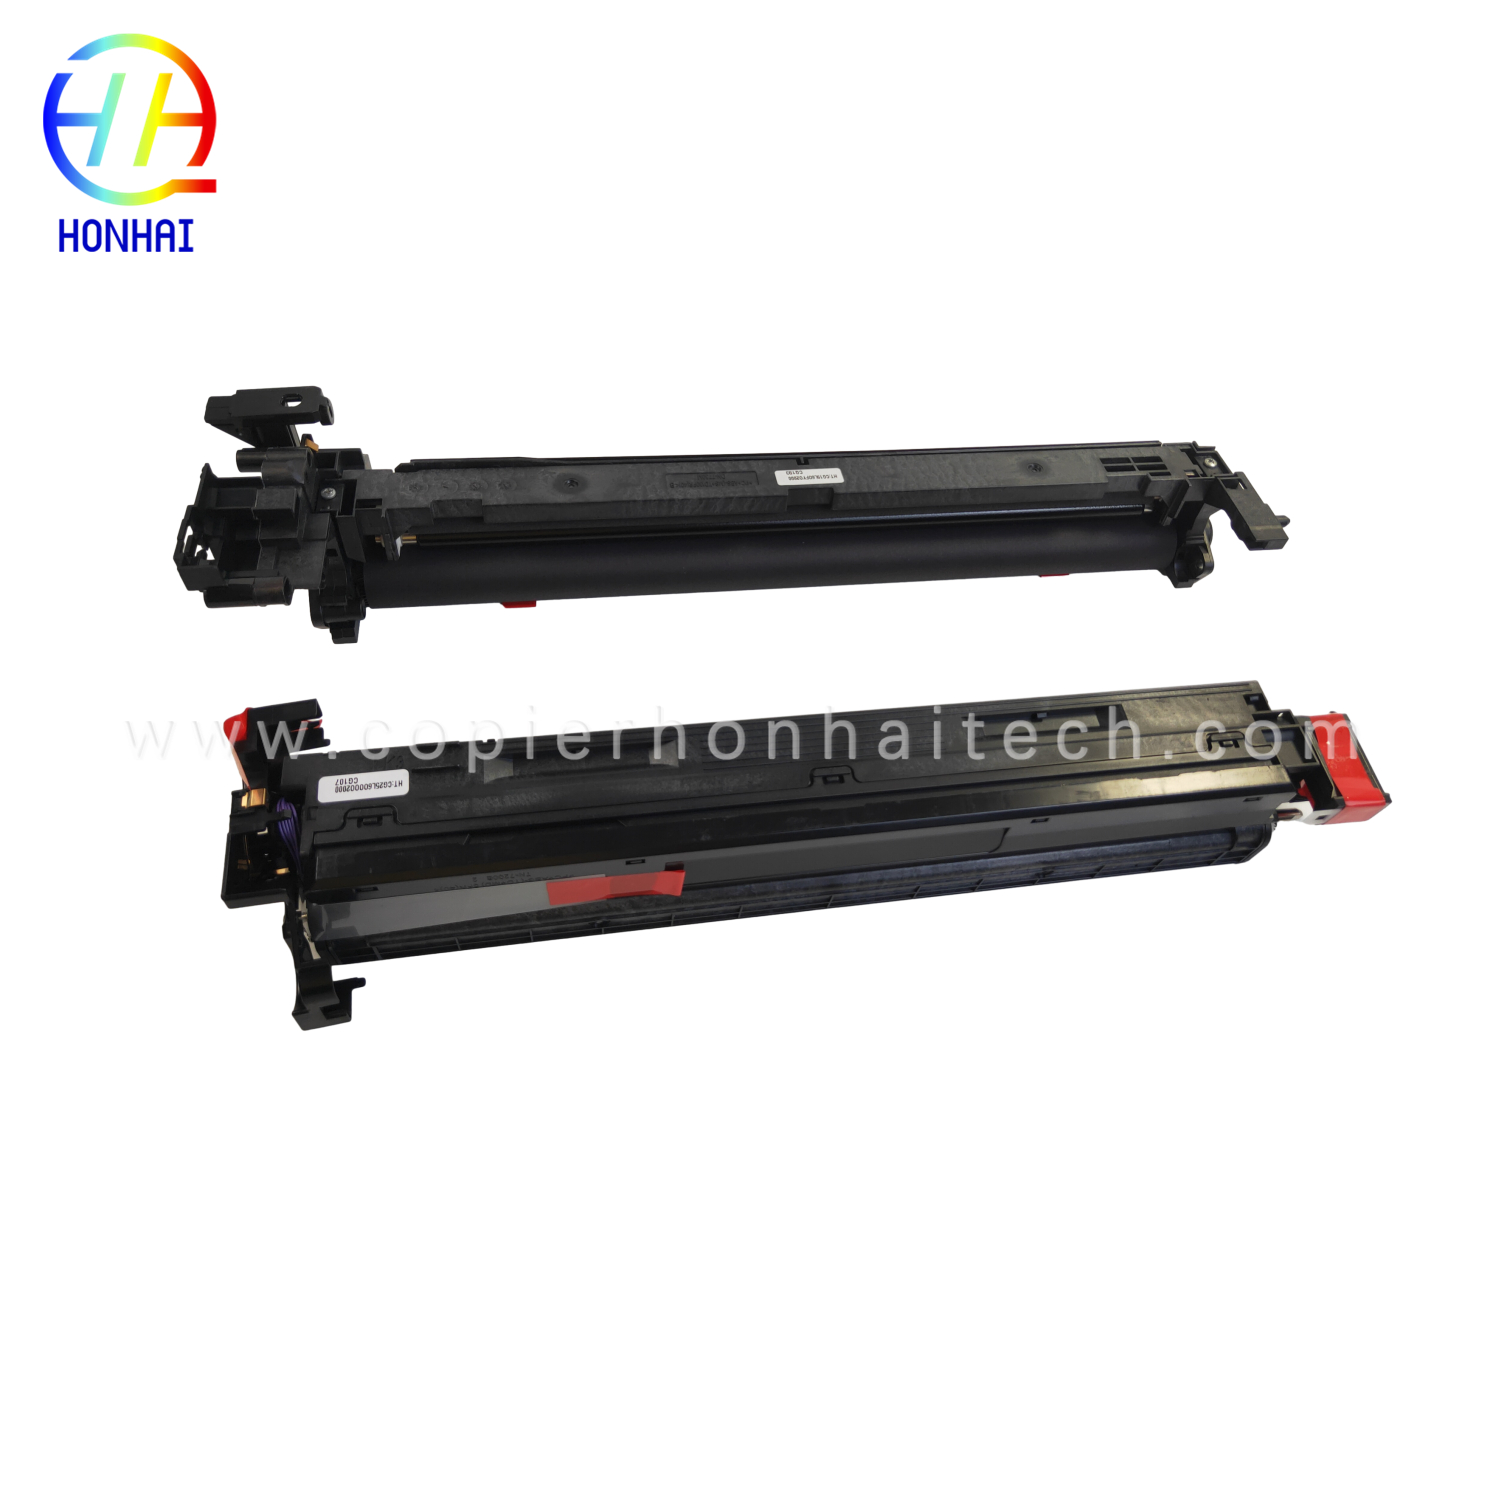 Drum Unit with Japan Fuji Opc Drum for Ricoh IM C2500 D0BK-2245 D0BK-2205 D0BK2205 D0BK2245 One used for each color – KCMY